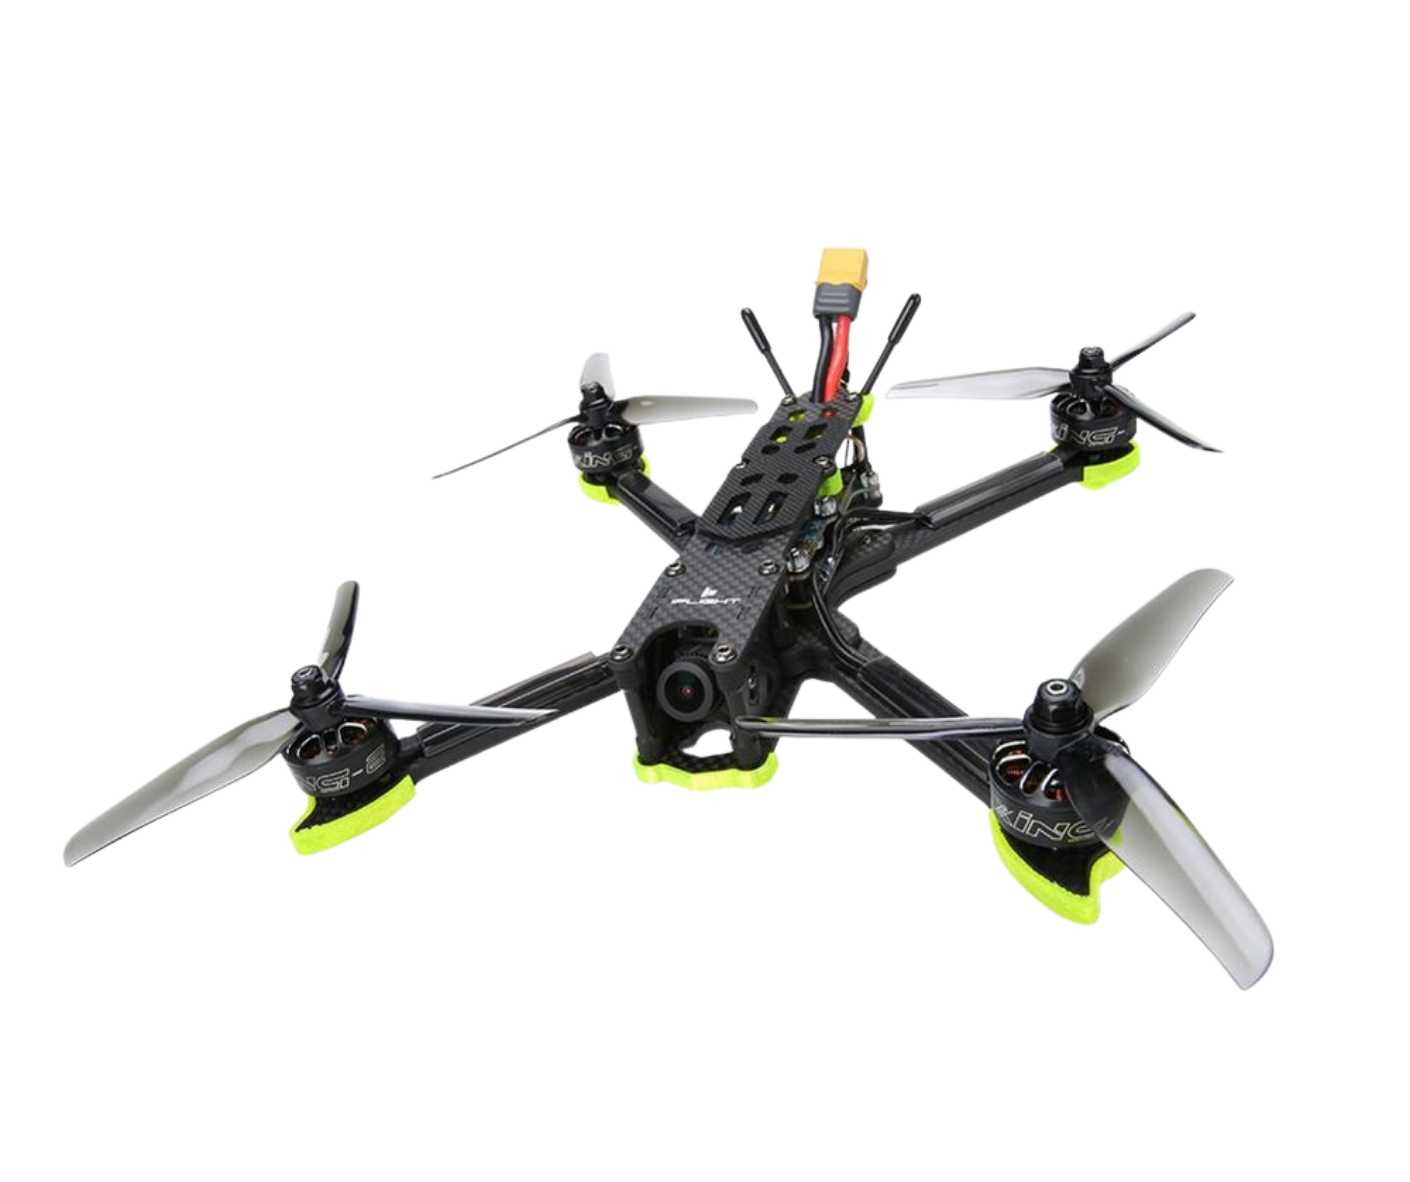 Image of a RC drone